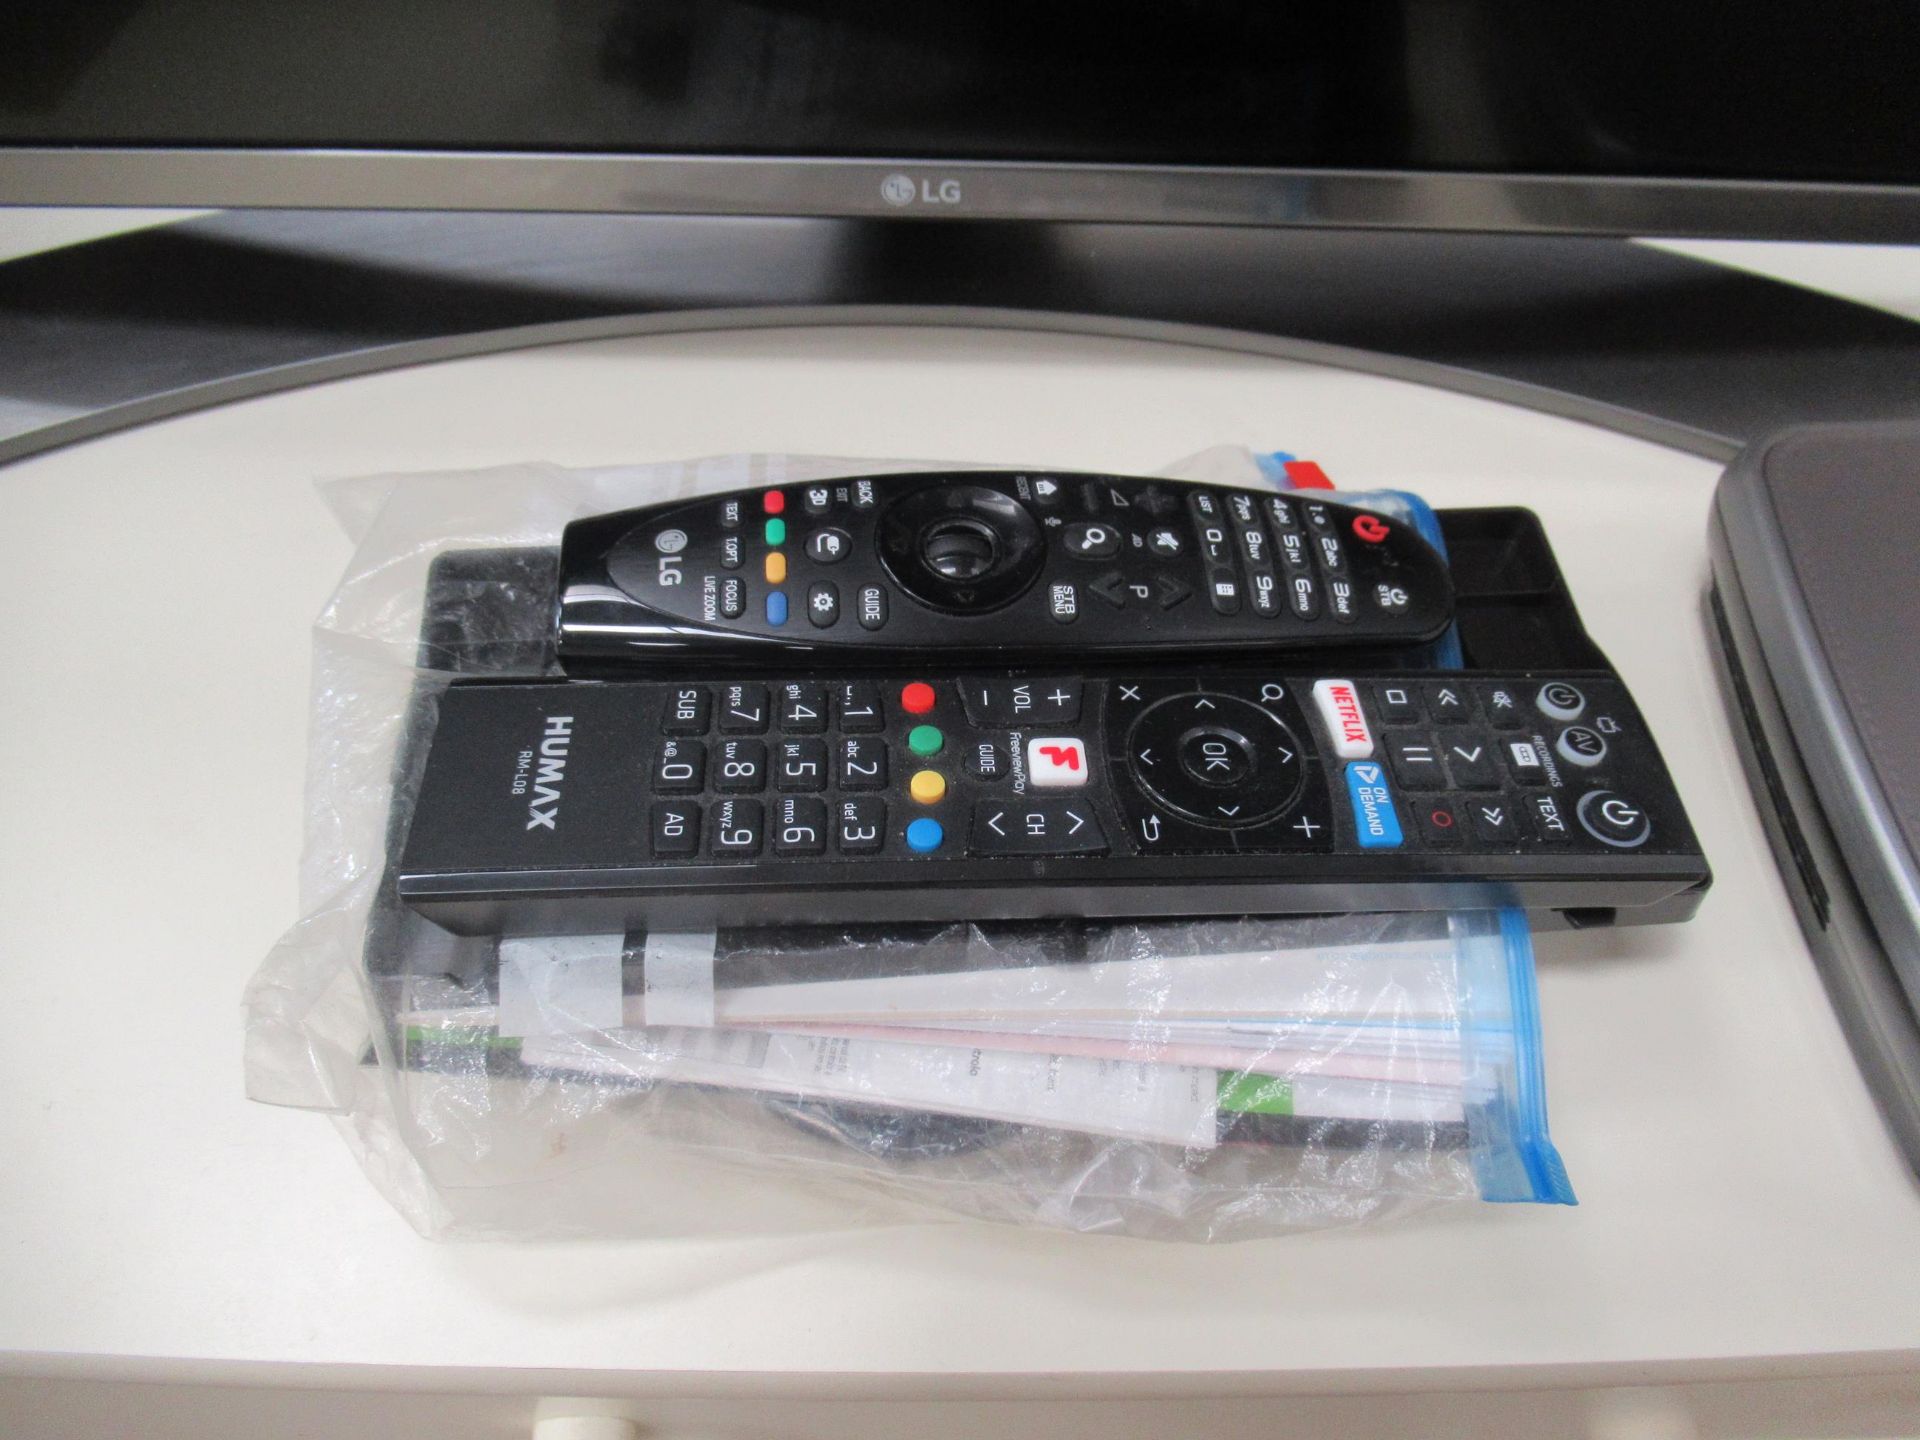 LG 43UH668V 43" Colour TV with Remote Control and Humax Freeview Set Top Box with remote control - Image 2 of 3